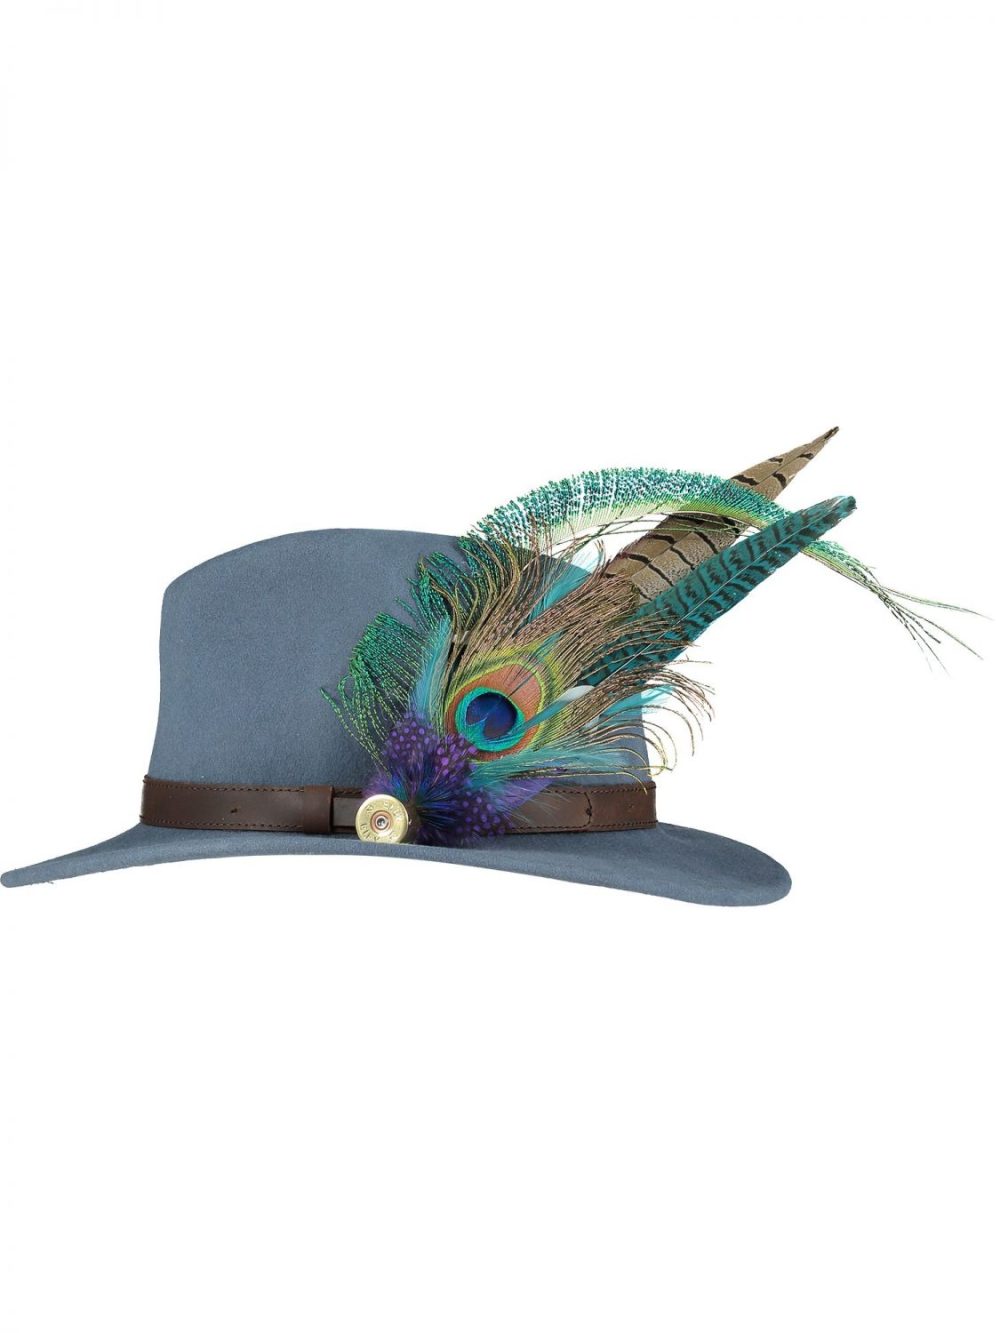 Large Peacock Feather Pin and Hat 1